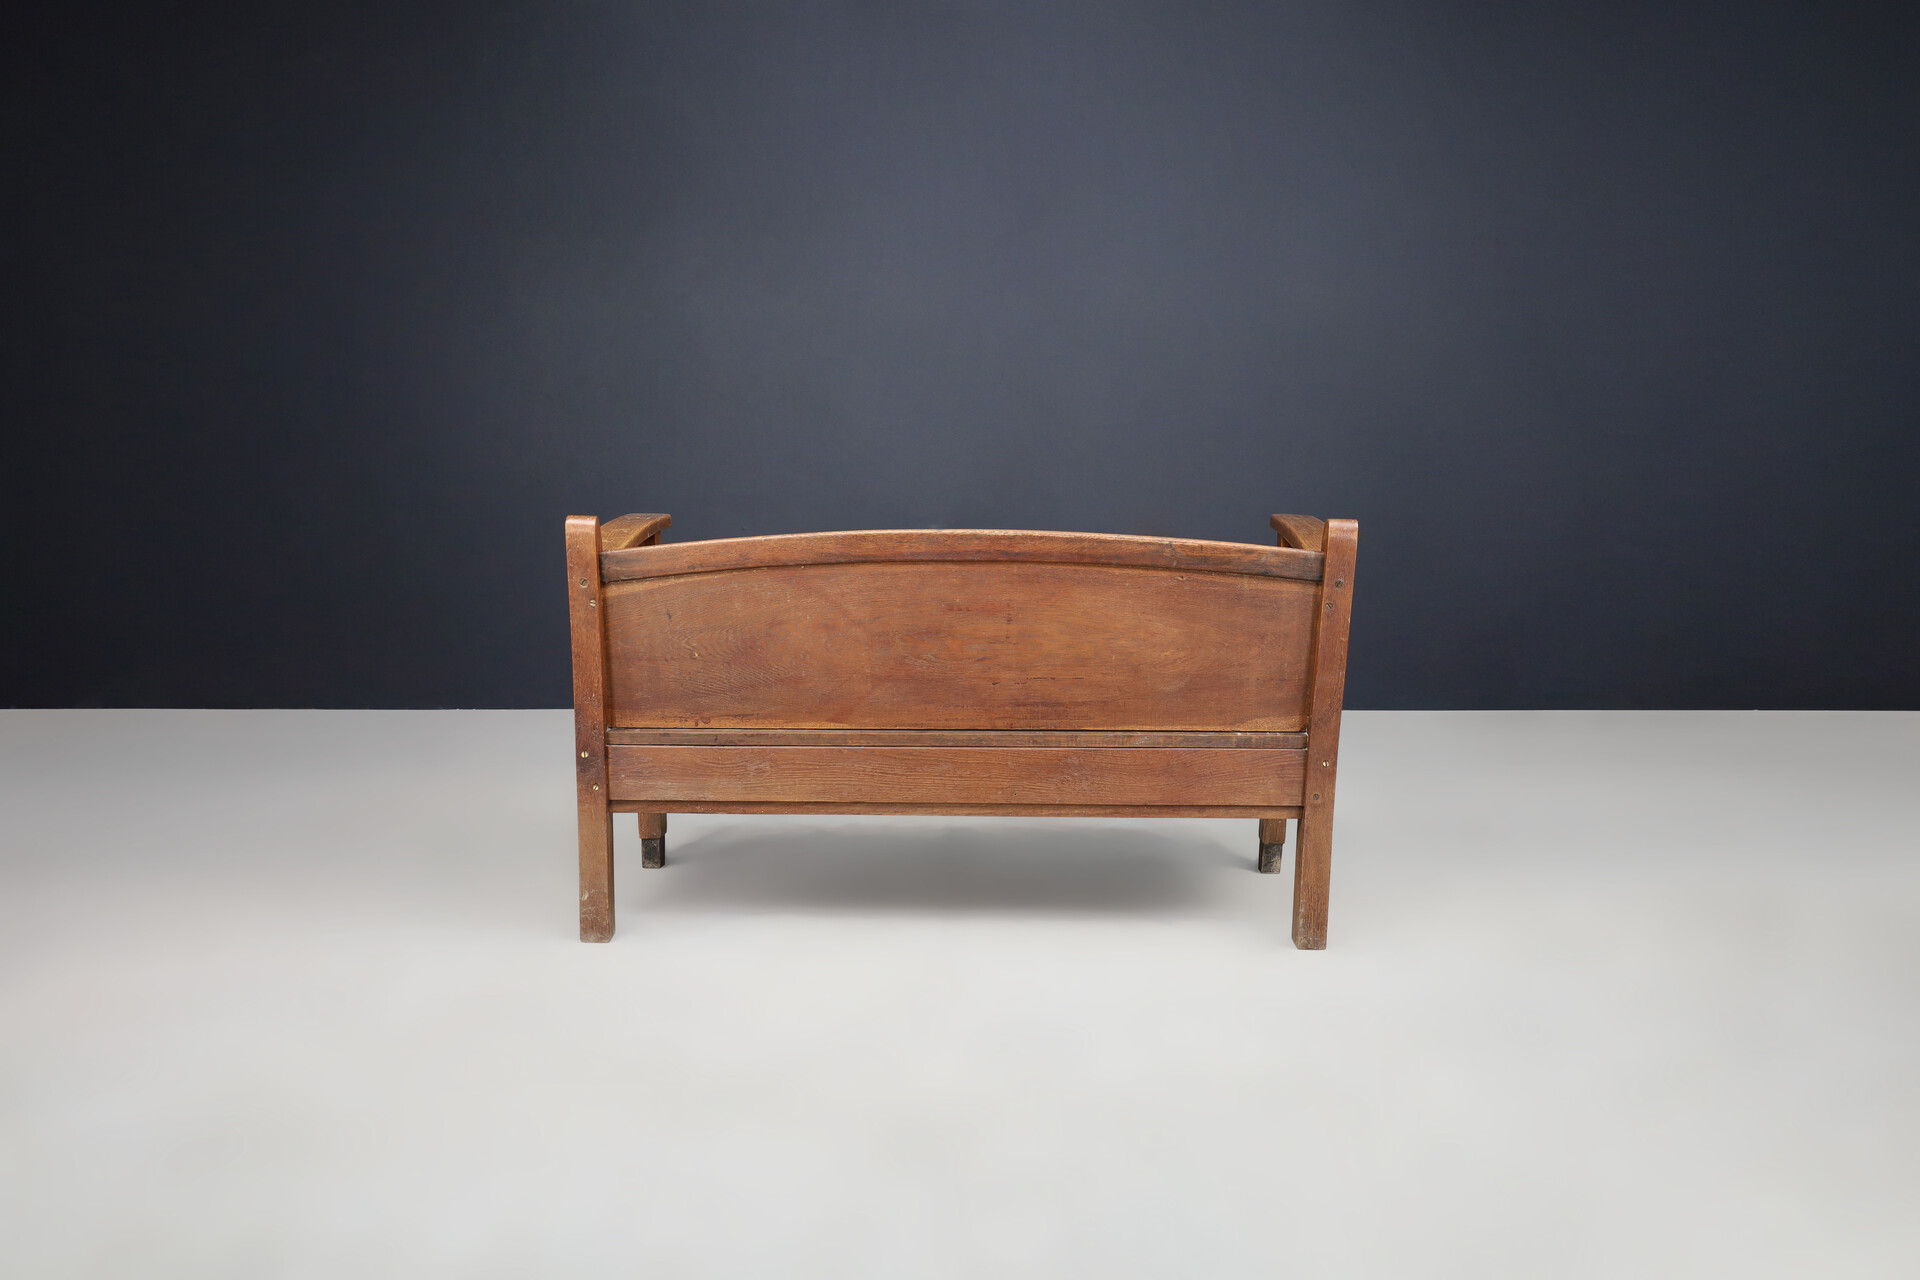 Art Deco Oak and Rush Bench, The Netherlands 1930s Early-20th century